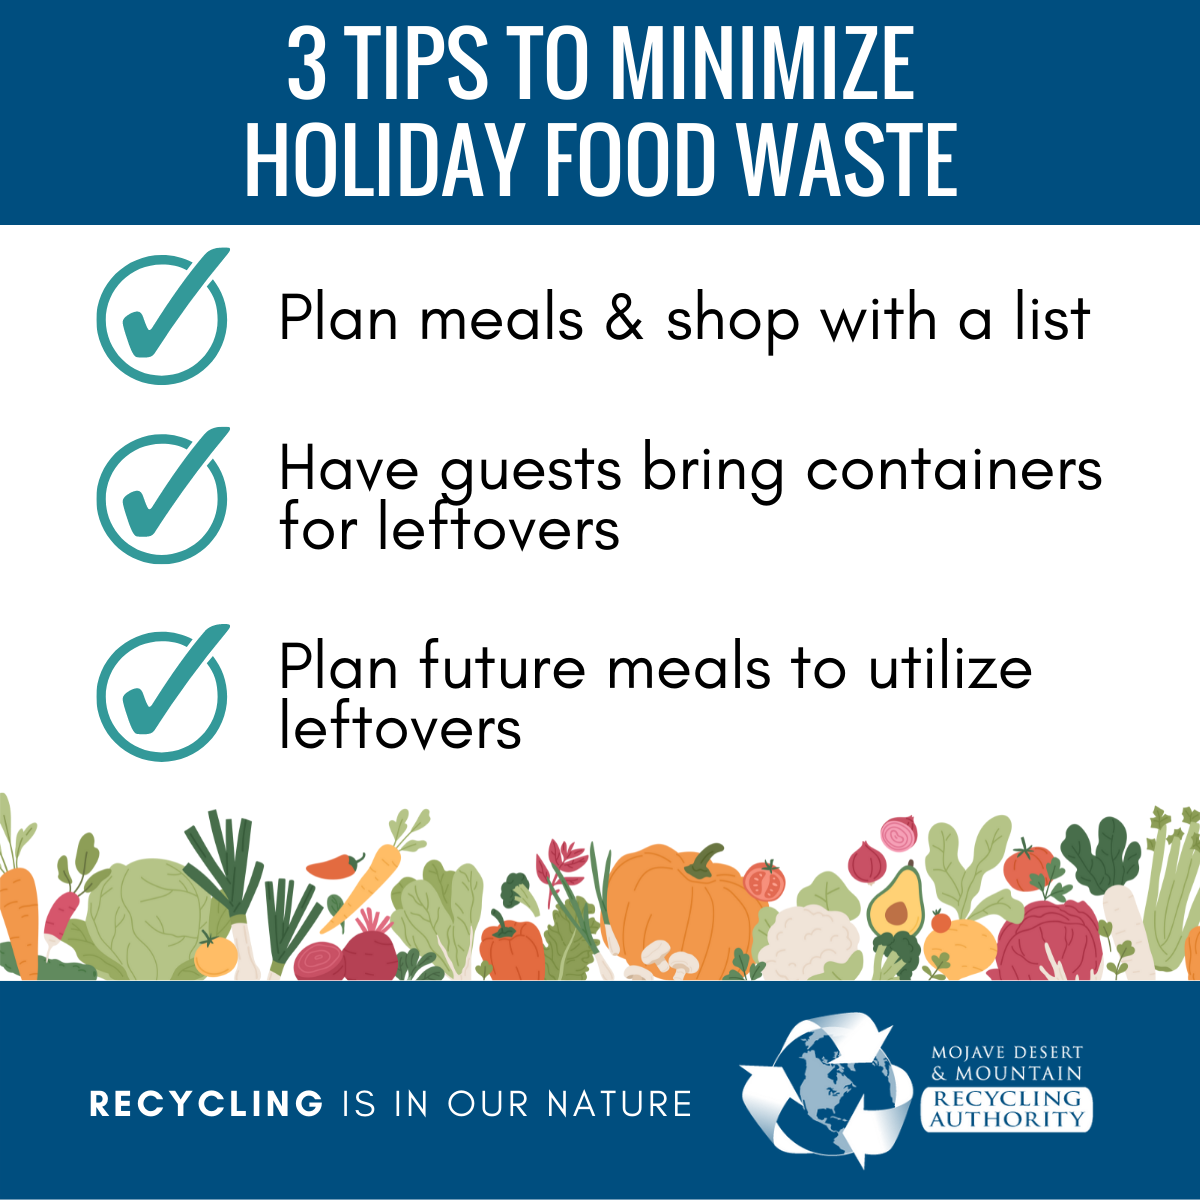 Checklist image of 3 tips to minimize holiday food waste